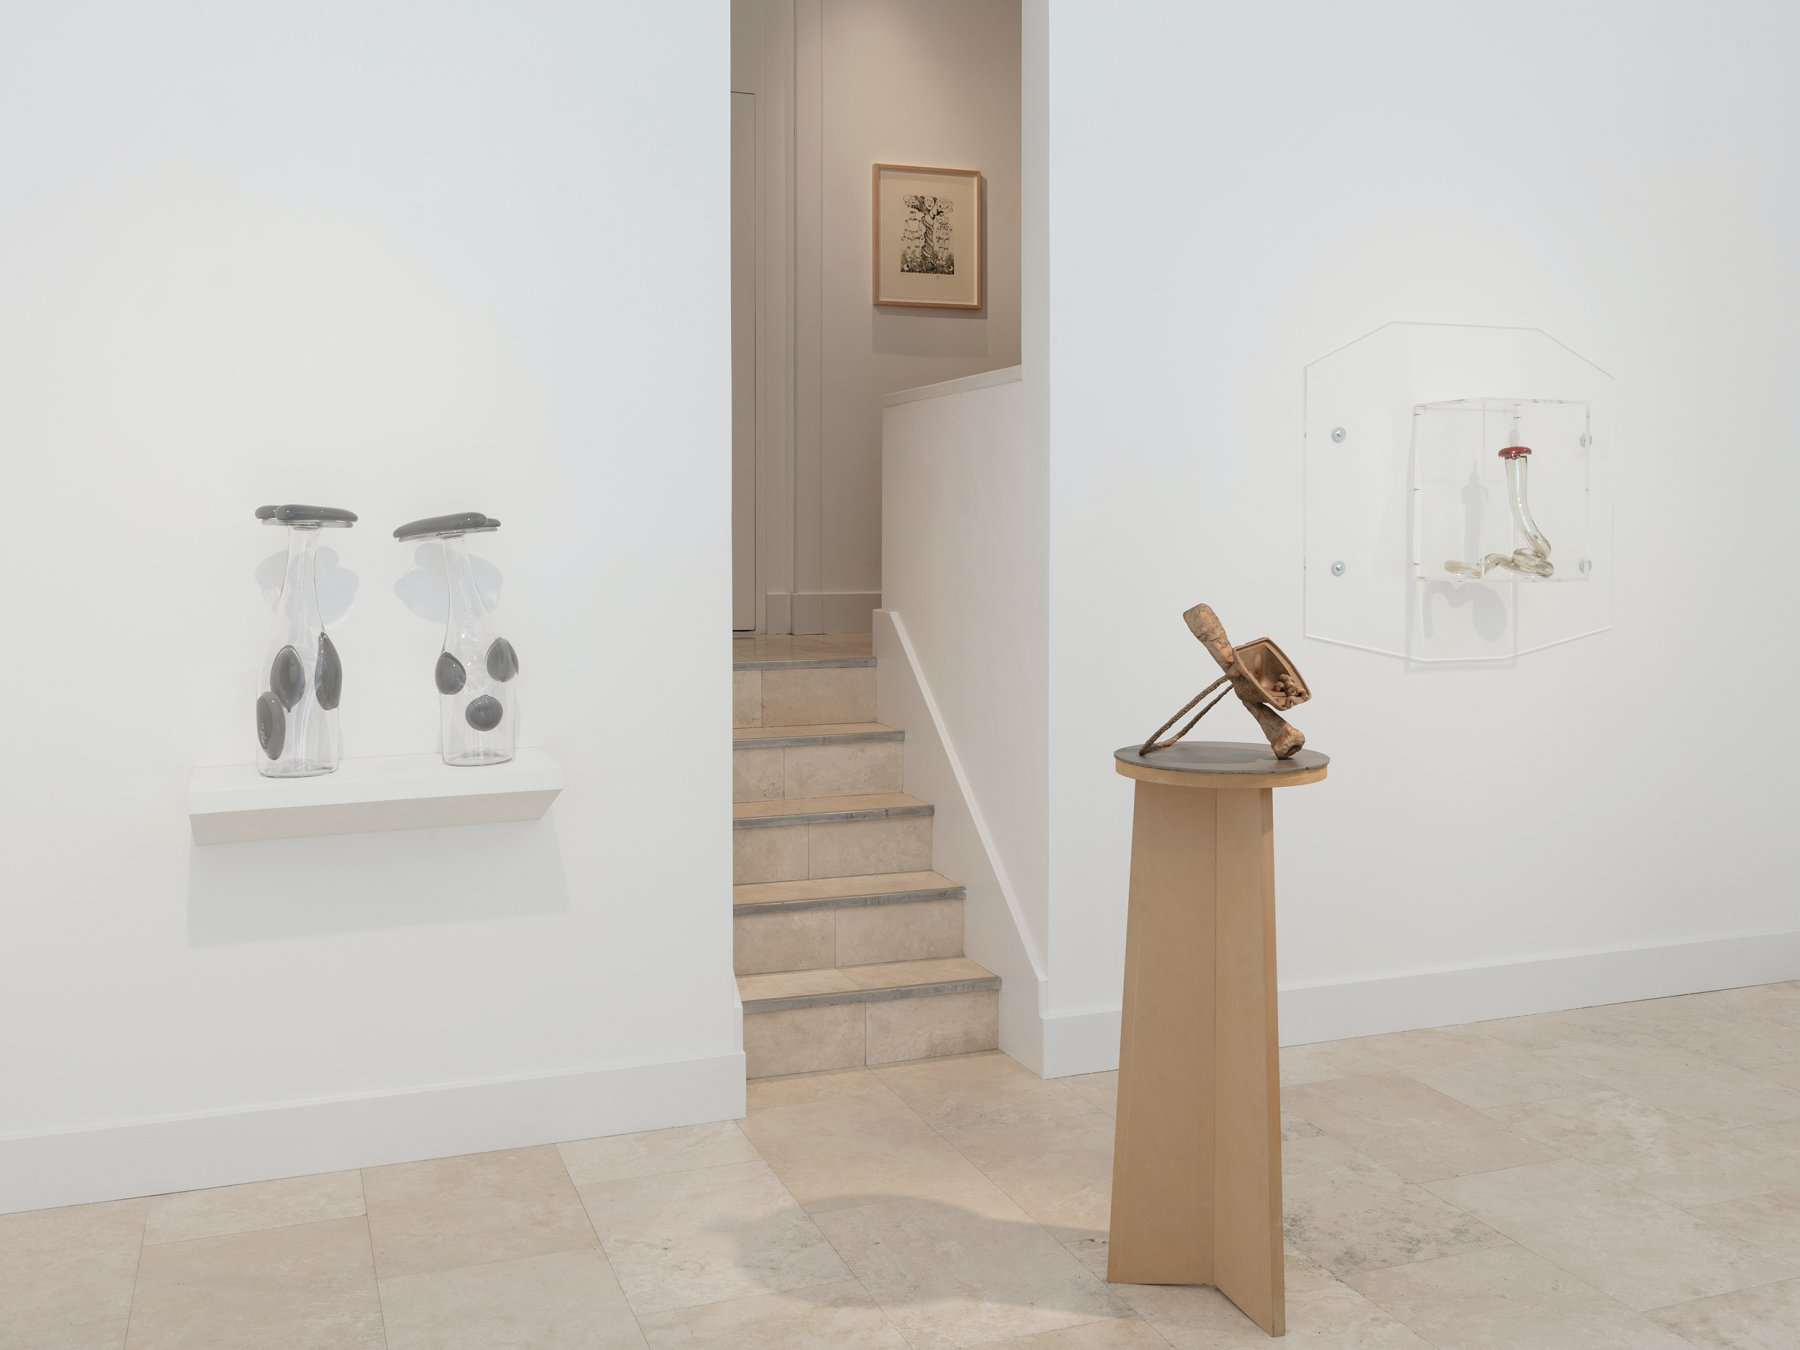 Installation image for Shared Sculptures: Bill Woodrow and Richard Deacon, at Holtermann Fine Art